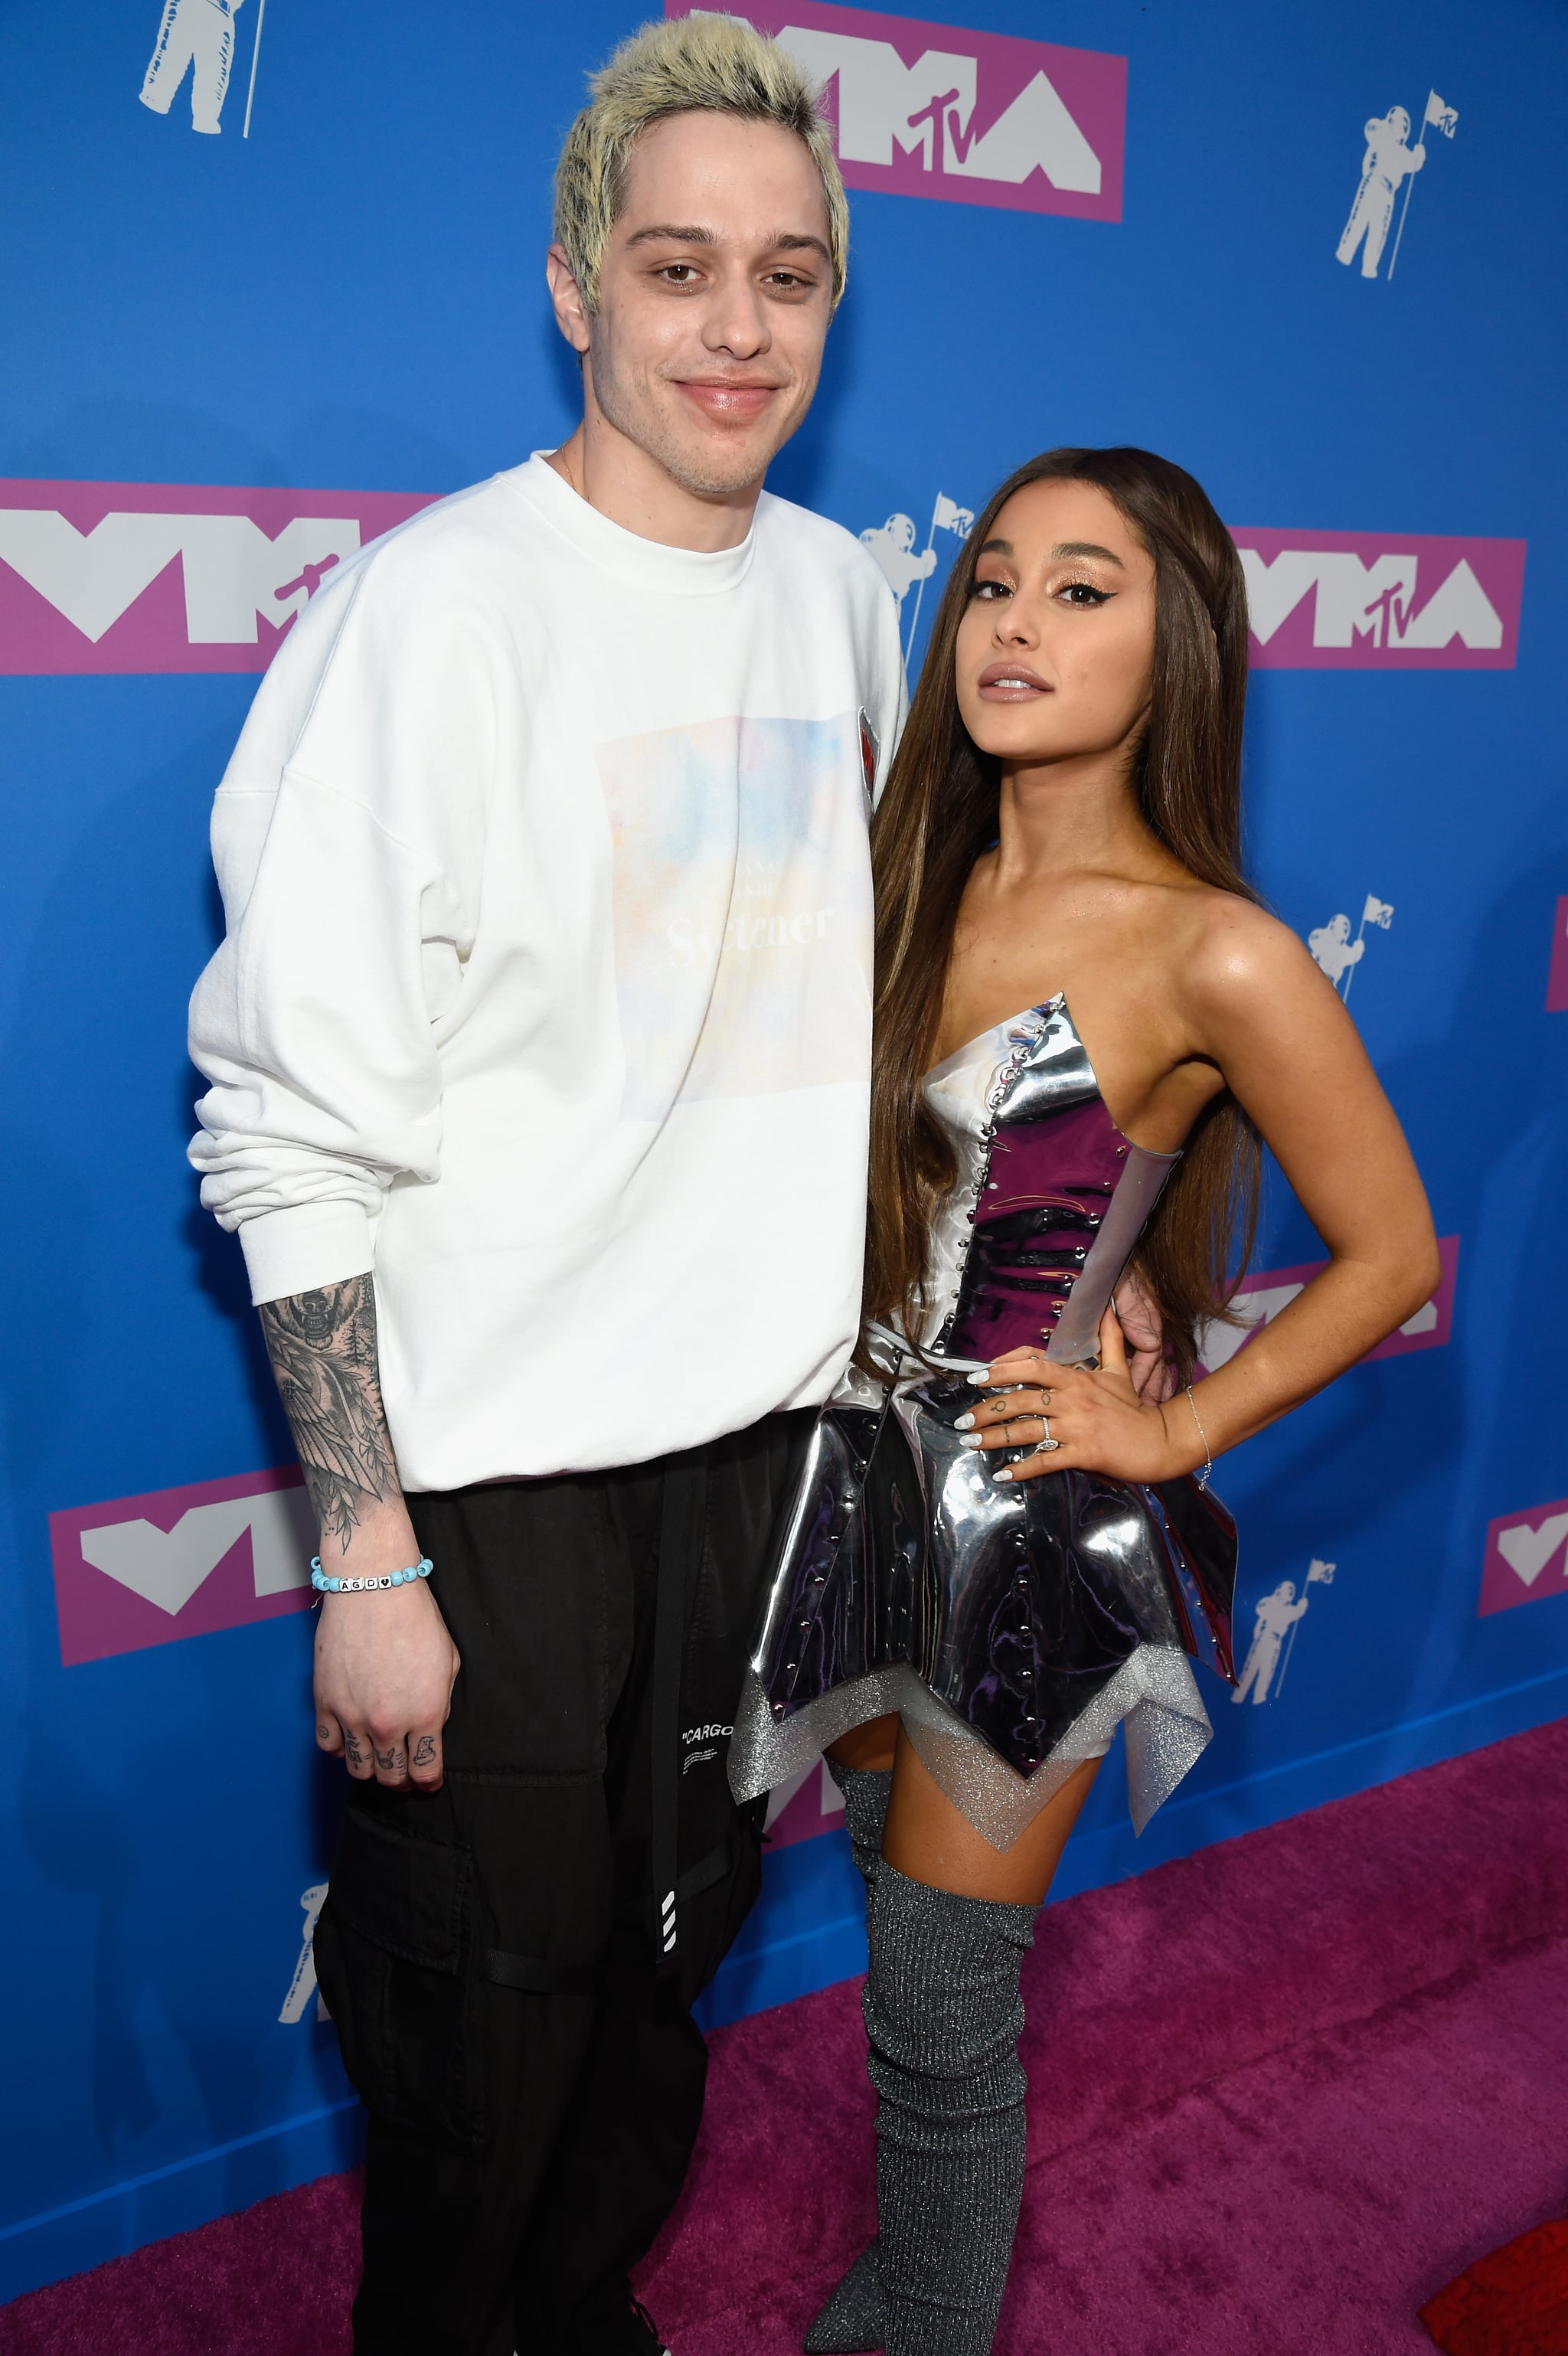 NEW YORK, NY - AUGUST 20: Pete Davison and Ariana Grande attend the MTV Video Music Awards 2018 at Radio City Music Hall on August 20, 2018 in New York. (Photo by Kevin Mazur / WireImage)